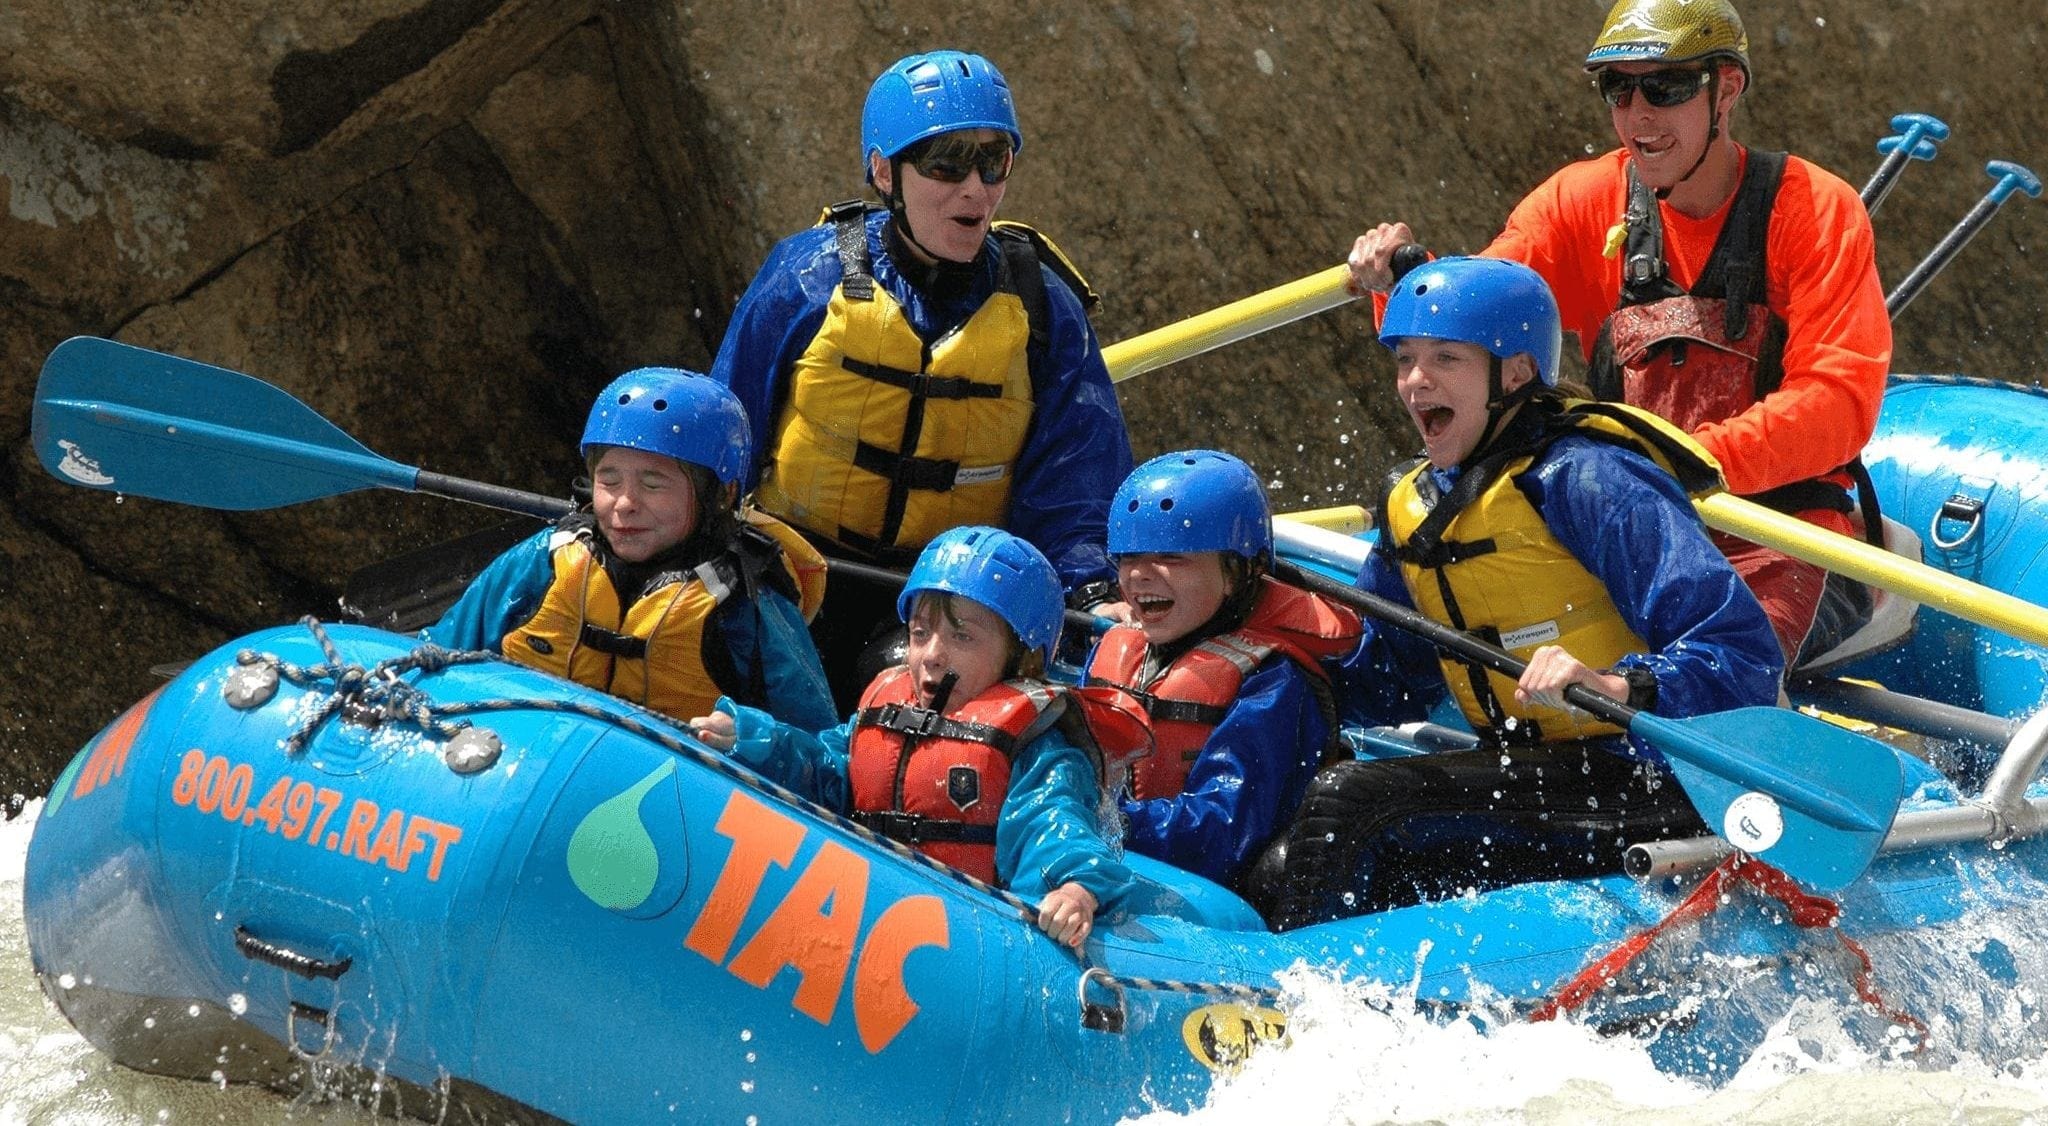 Rafting with kids in the Blue River in Colorado